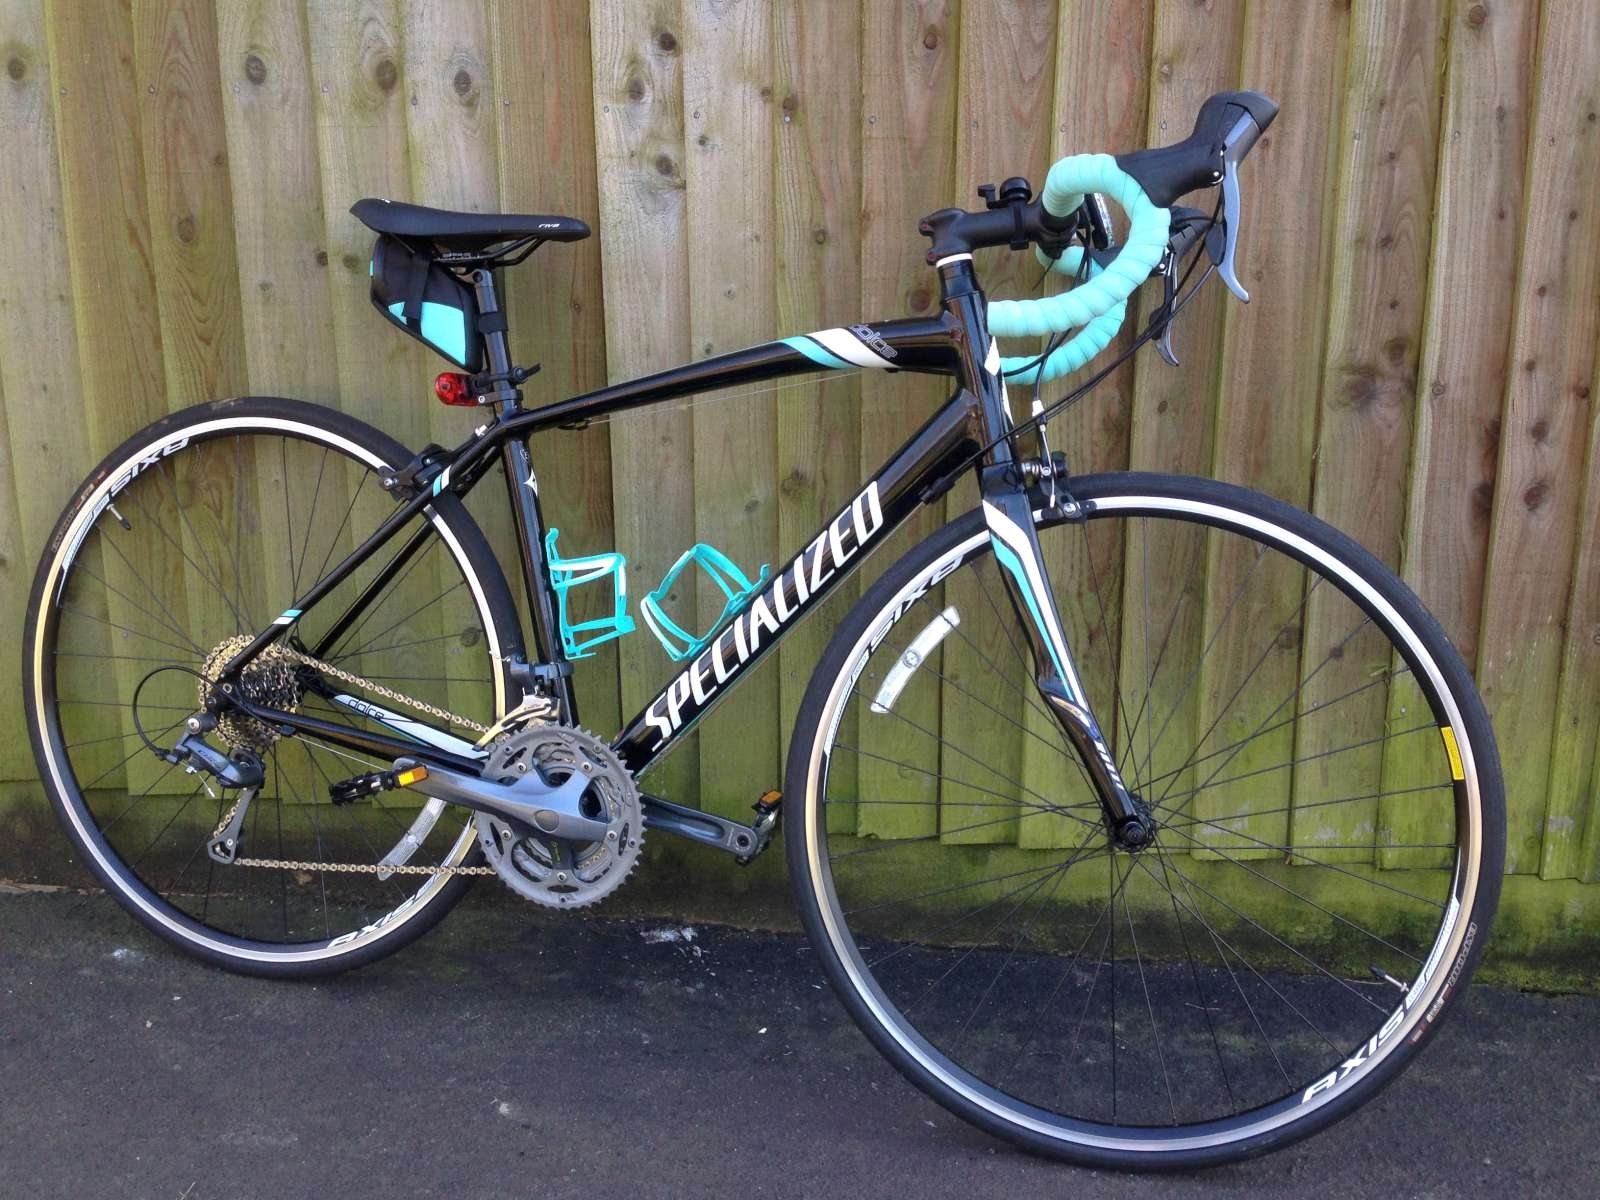 Specialized Dolce Ladies Bike (2014), 54cm frame, 24 speed, Black and Teal - Sold for £255